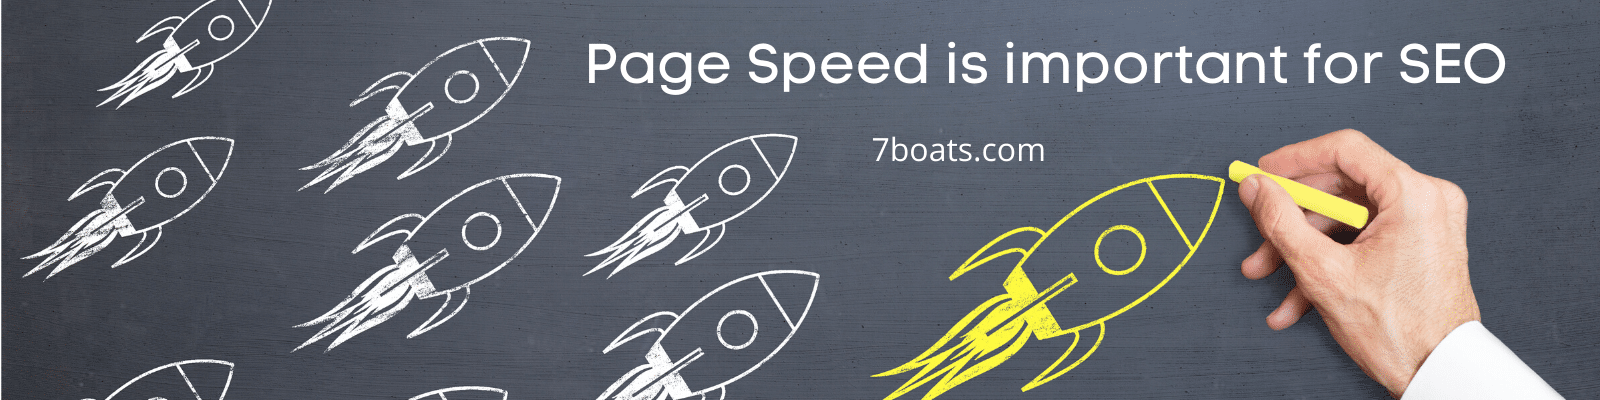 How to speed up your website – How to improve page load time